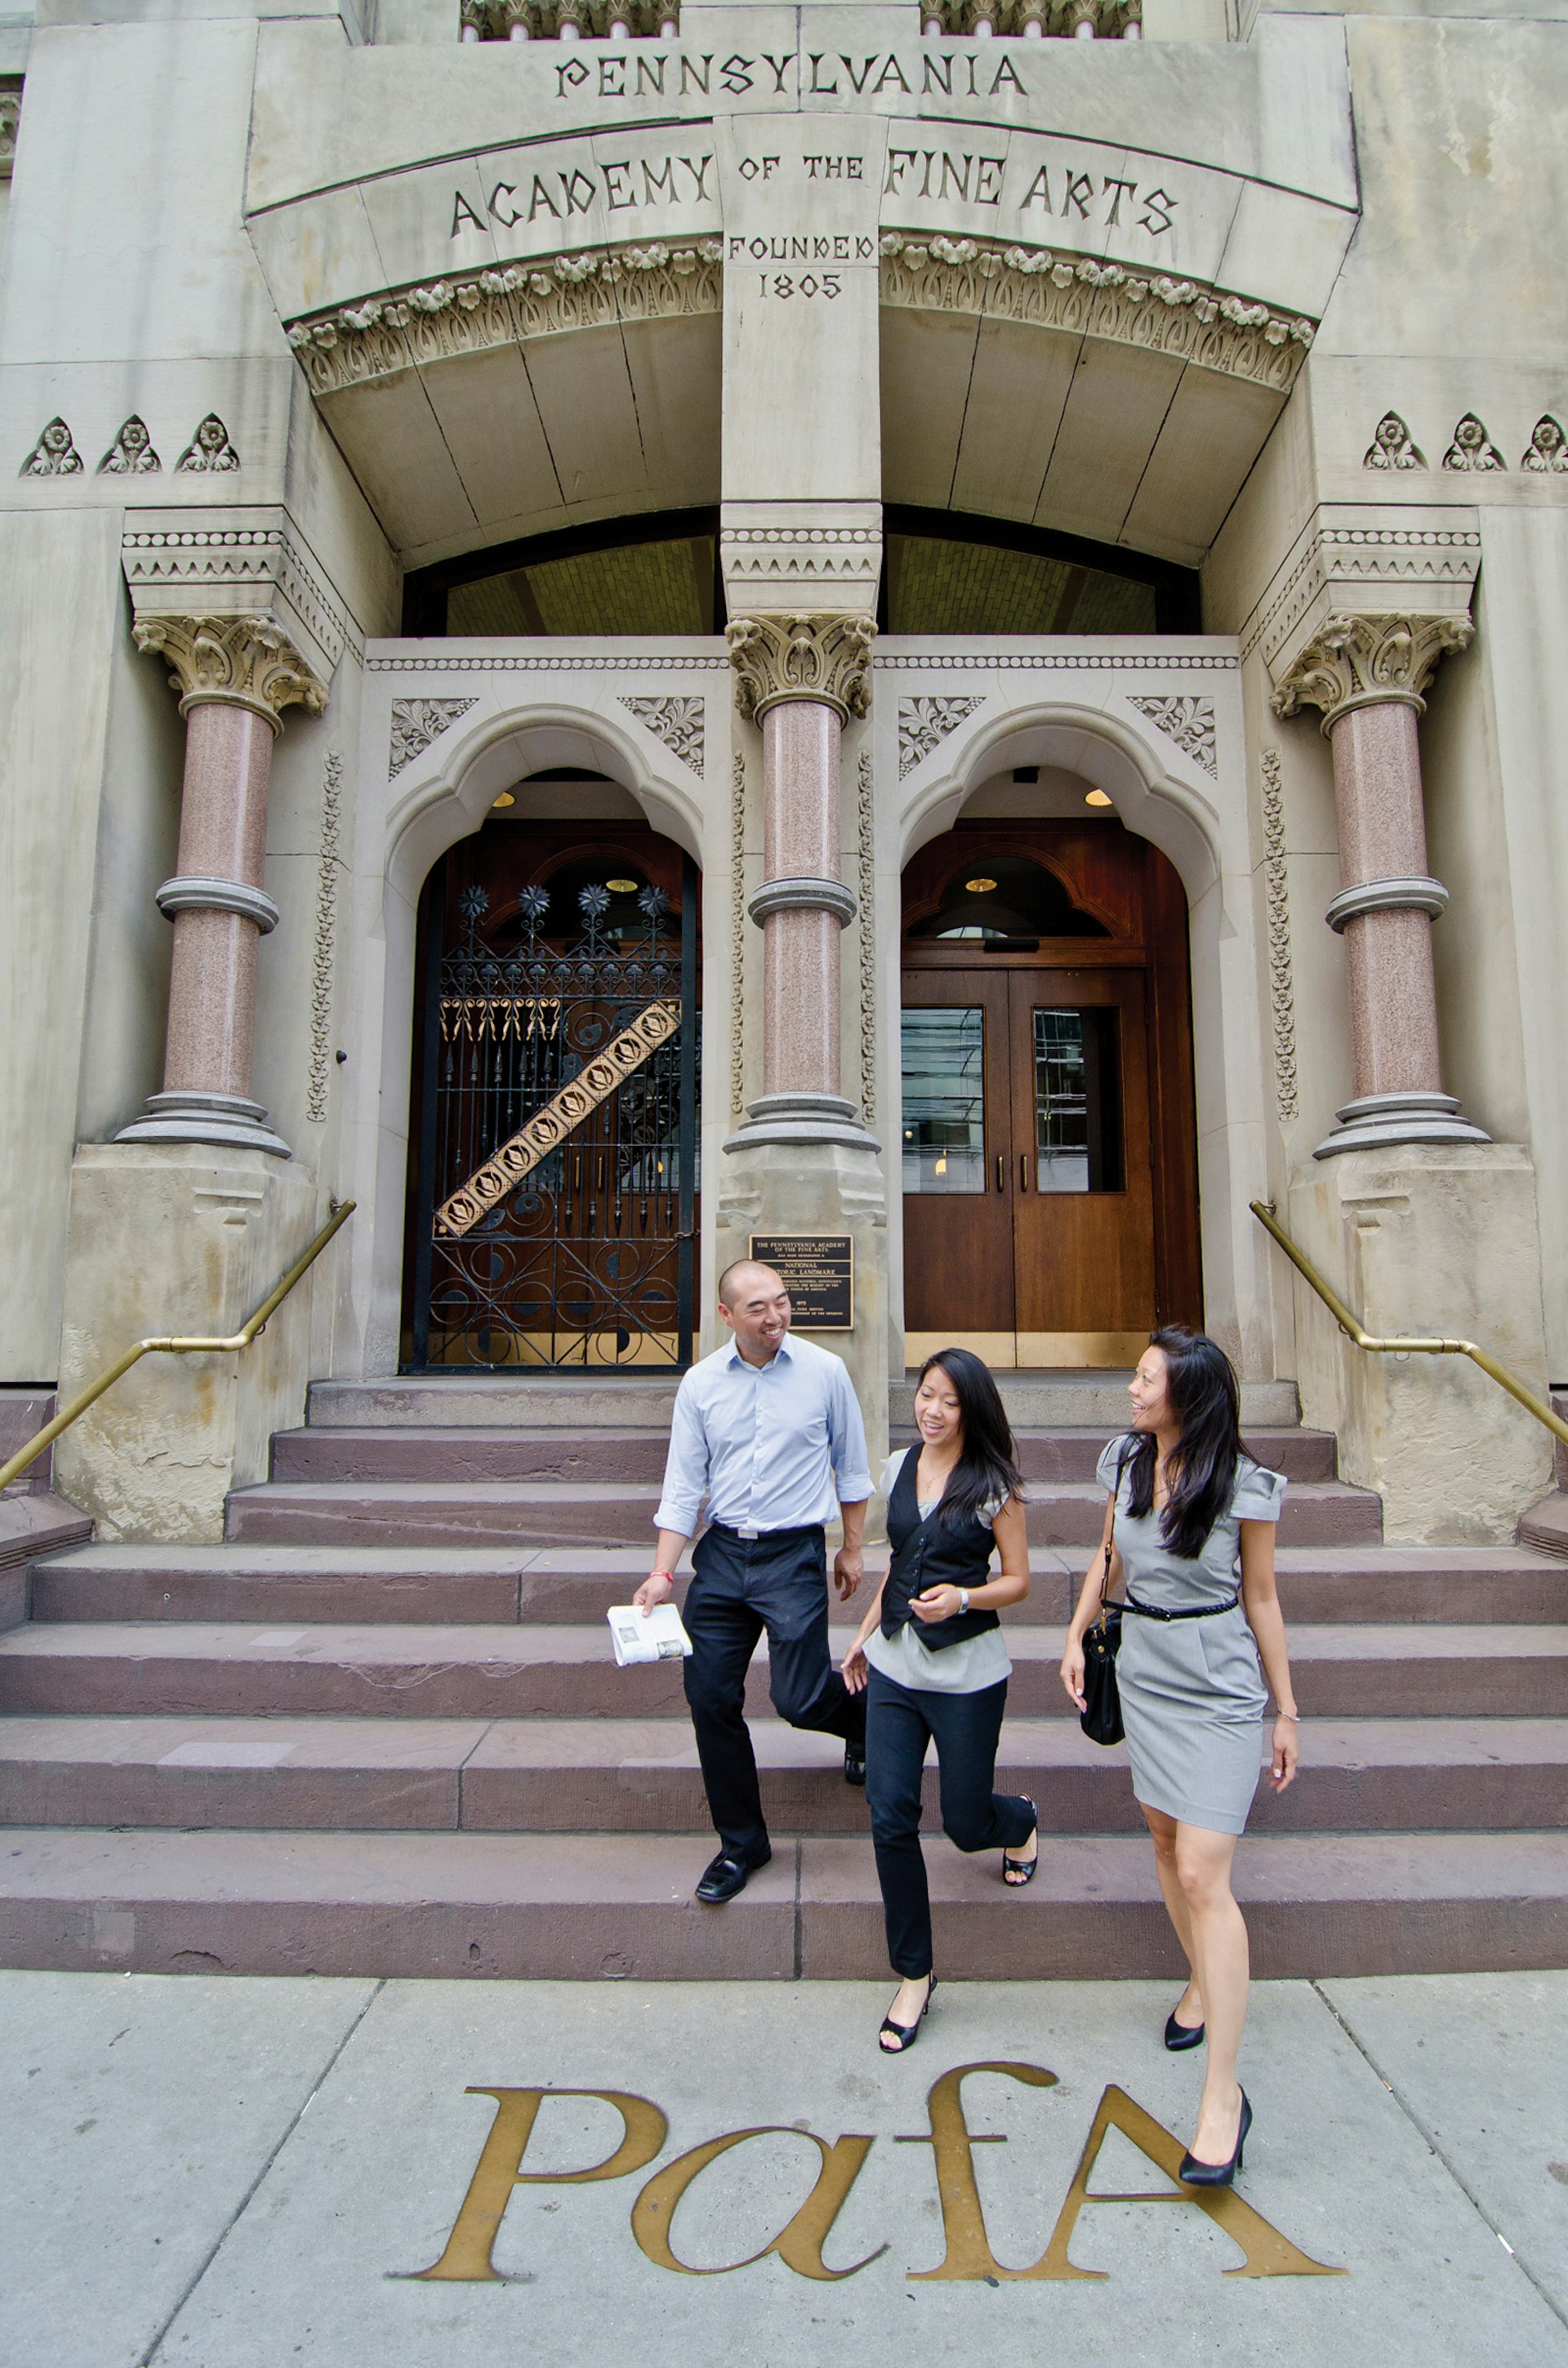 two women and a man walk down the front steps of the Pennsylvania Academy of Fine Arts in Philadelphia